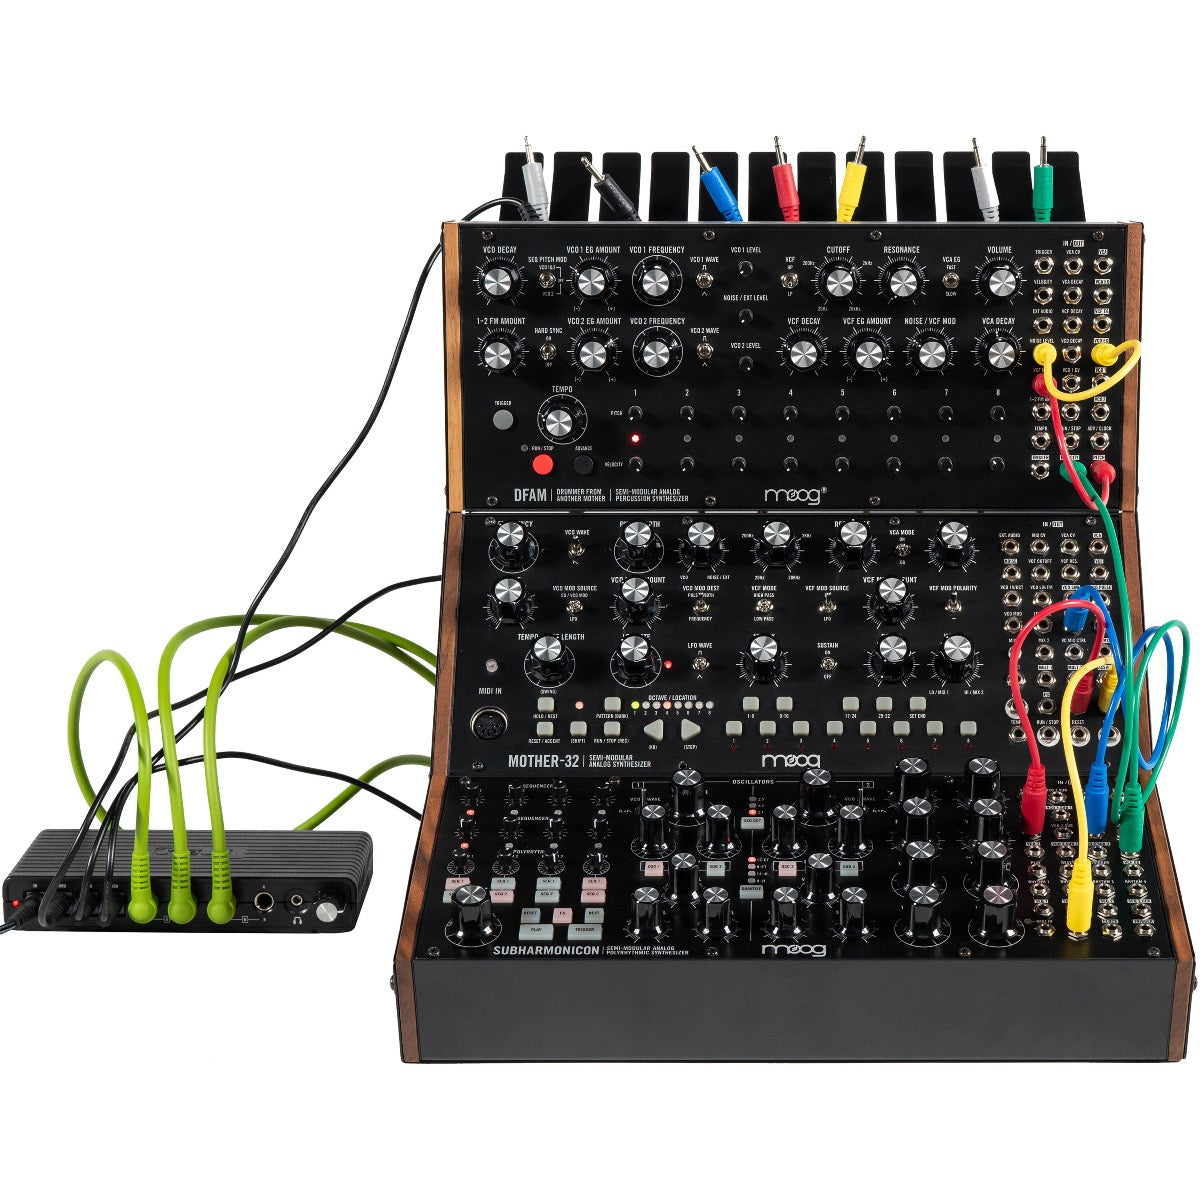 Close-up image of Moog Sound Studio - Mother-32, Subharmonicon & DFAM Analog Synthesizer Bundle showing Mother-32 and DFAM in 2-Tier Rack Kit with cable organizer attached alongside summing mixer with power, audio and patch cables connected